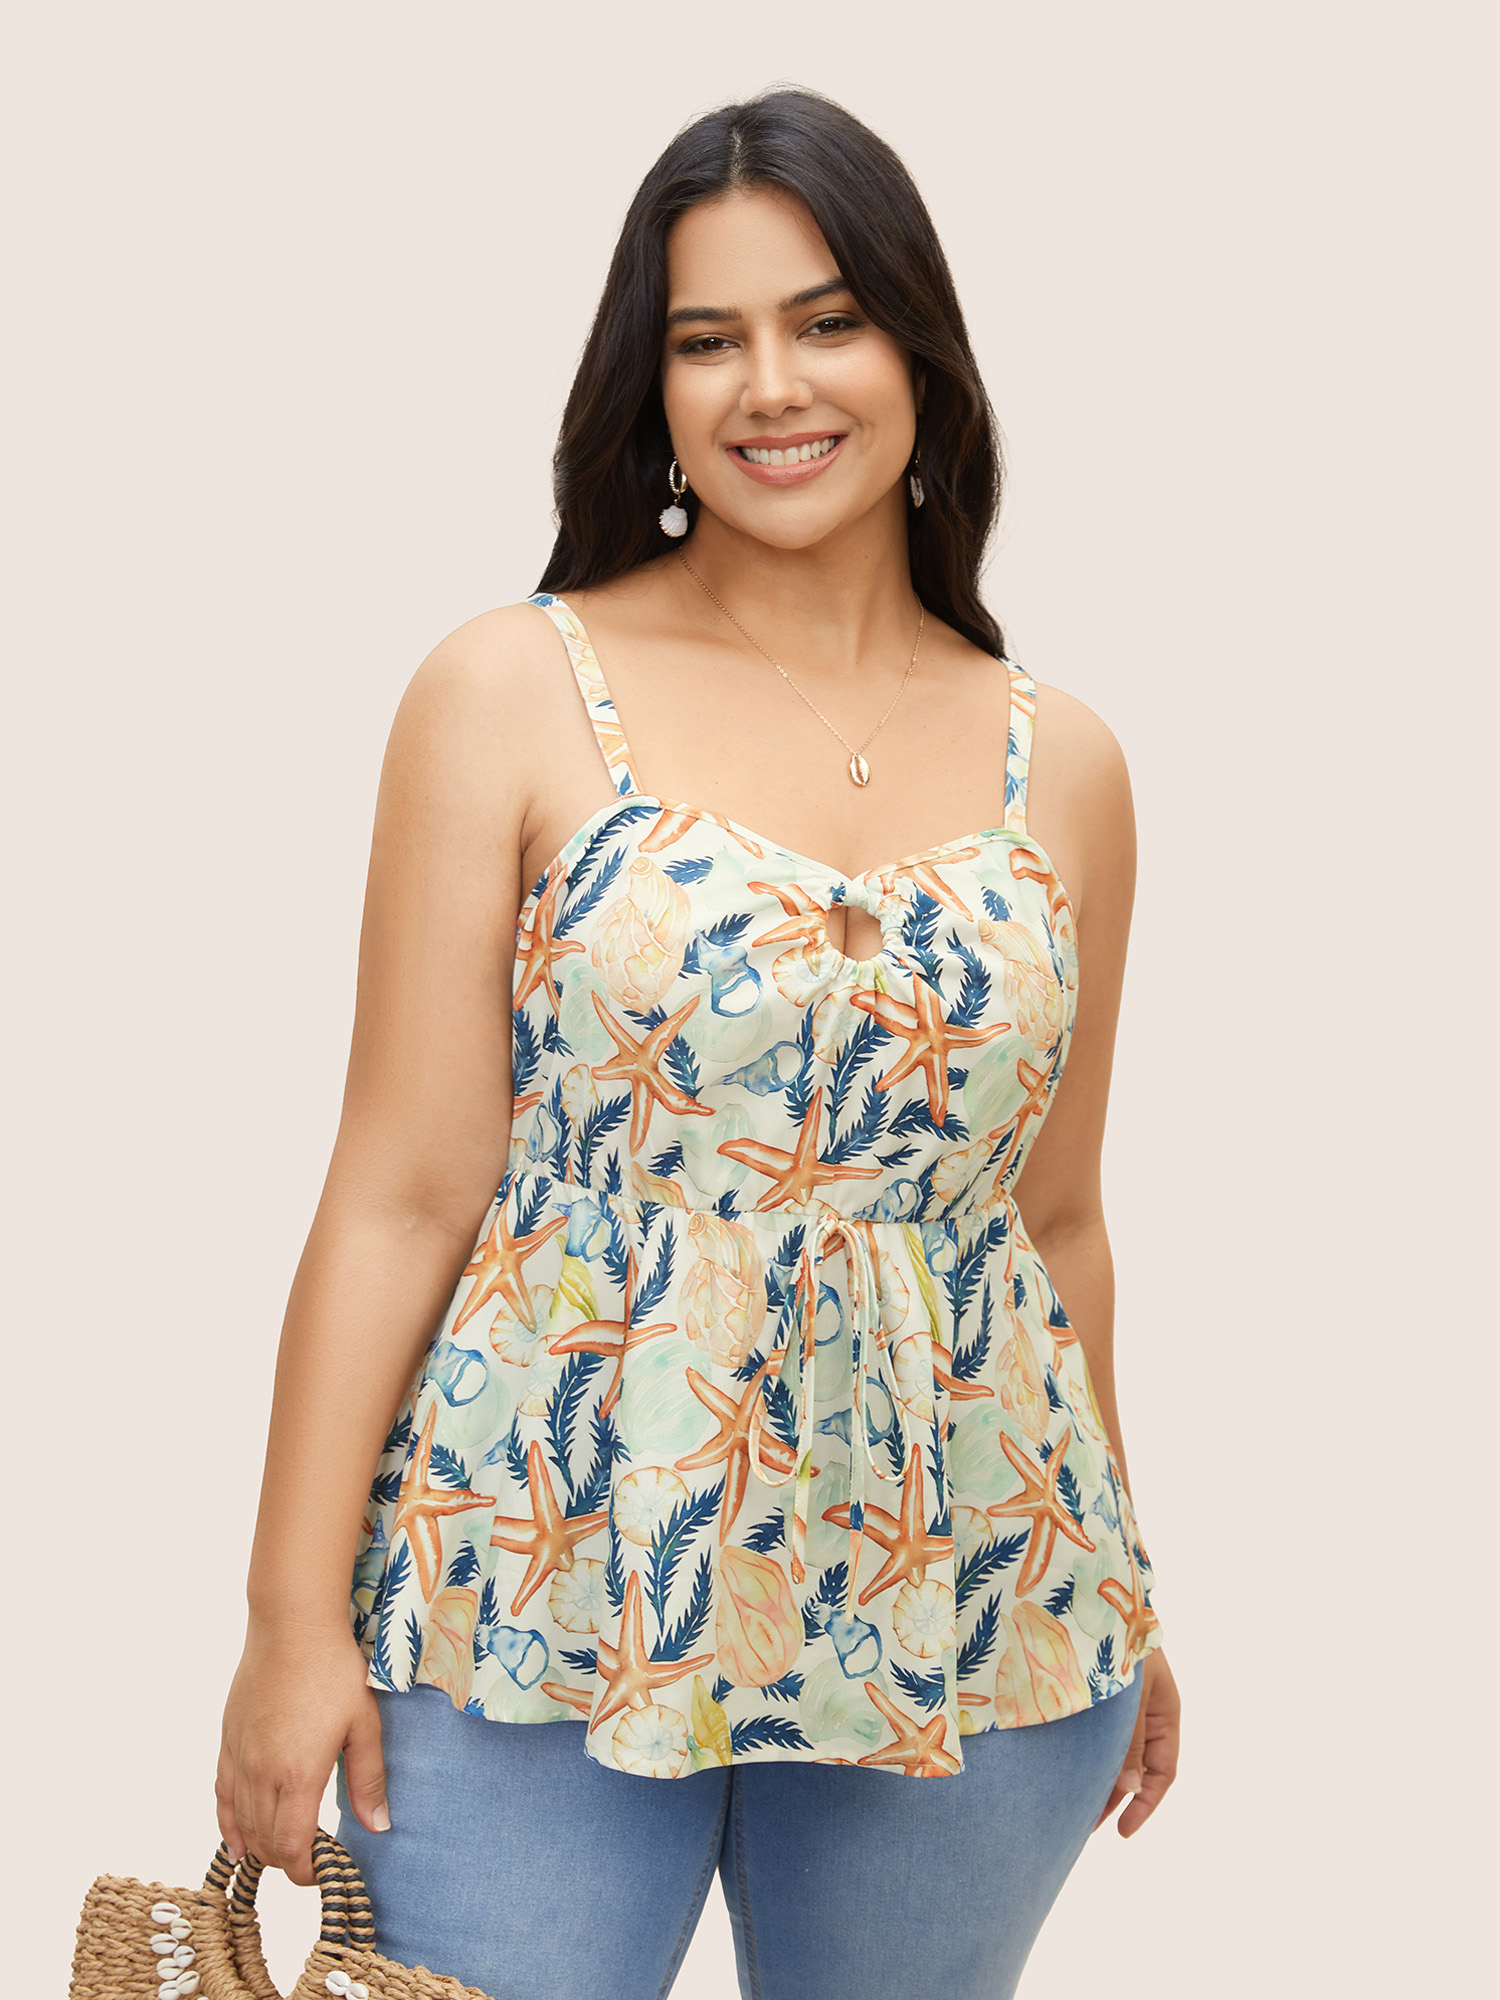 

Plus Size Marine Elements Keyhole Ties Cami Top Women Multicolor Resort Contrast Non Vacation Tank Tops Camis BloomChic